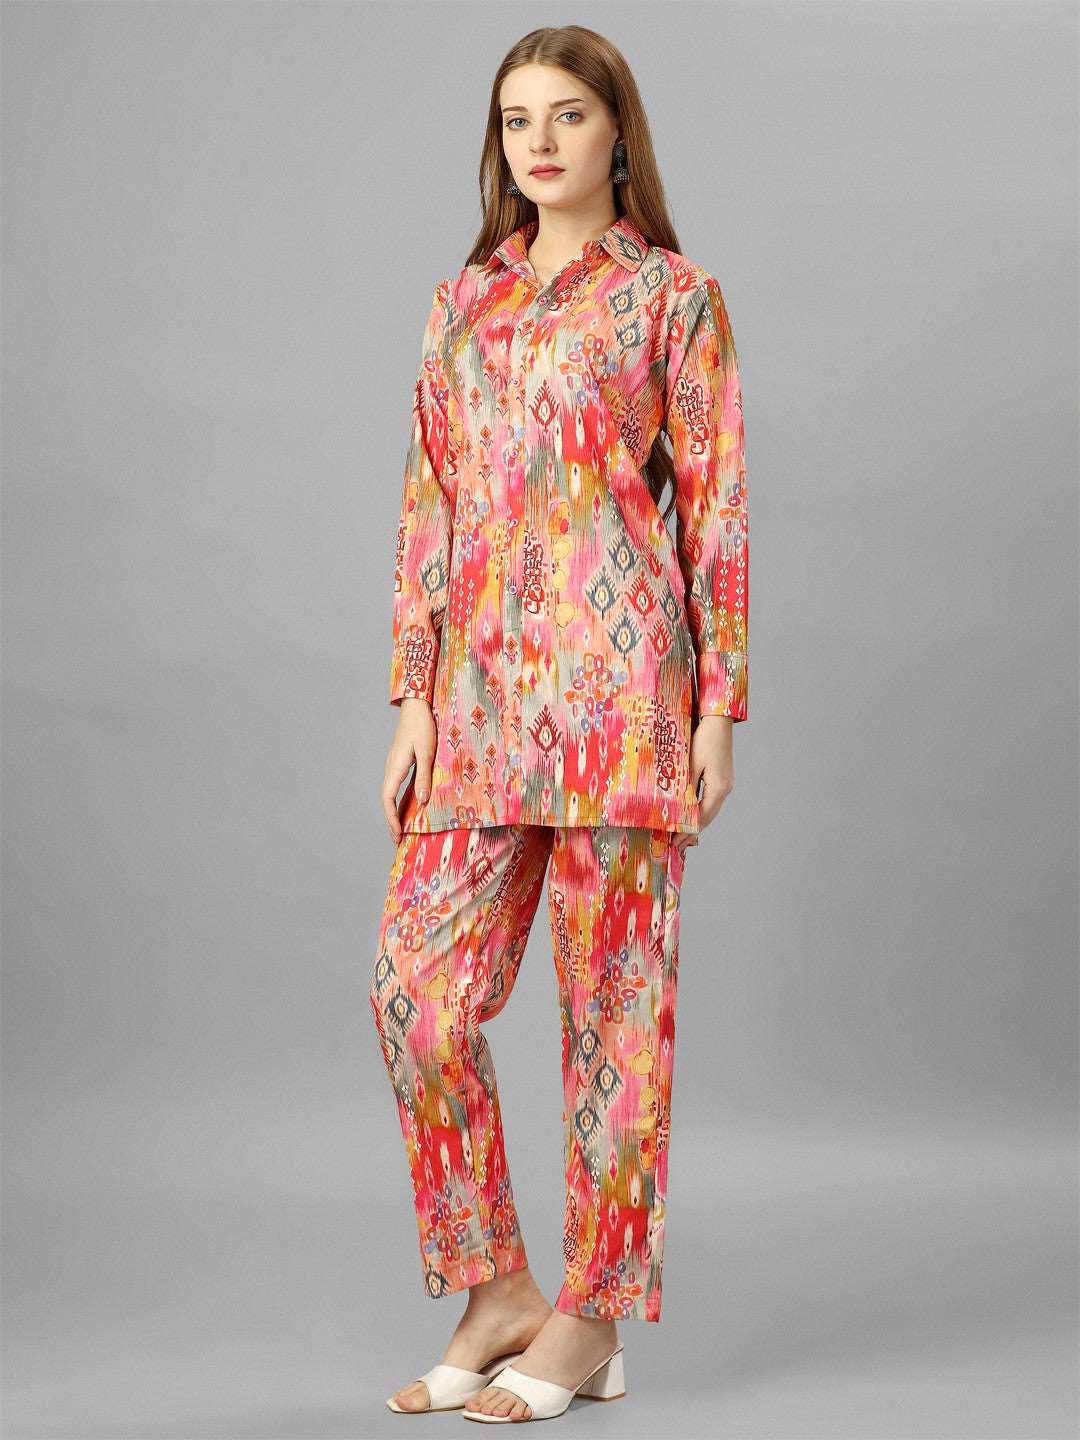 The model in the image is wearing Orange Floral Cotton Co-Ord Set from Alice Milan. Crafted with the finest materials and impeccable attention to detail, the  looks premium, trendy, luxurious and offers unparalleled comfort. It’s a perfect clothing option for loungewear, resort wear, party wear or for an airport look. The woman in the image looks happy, and confident with her style statement putting a happy smile on her face.